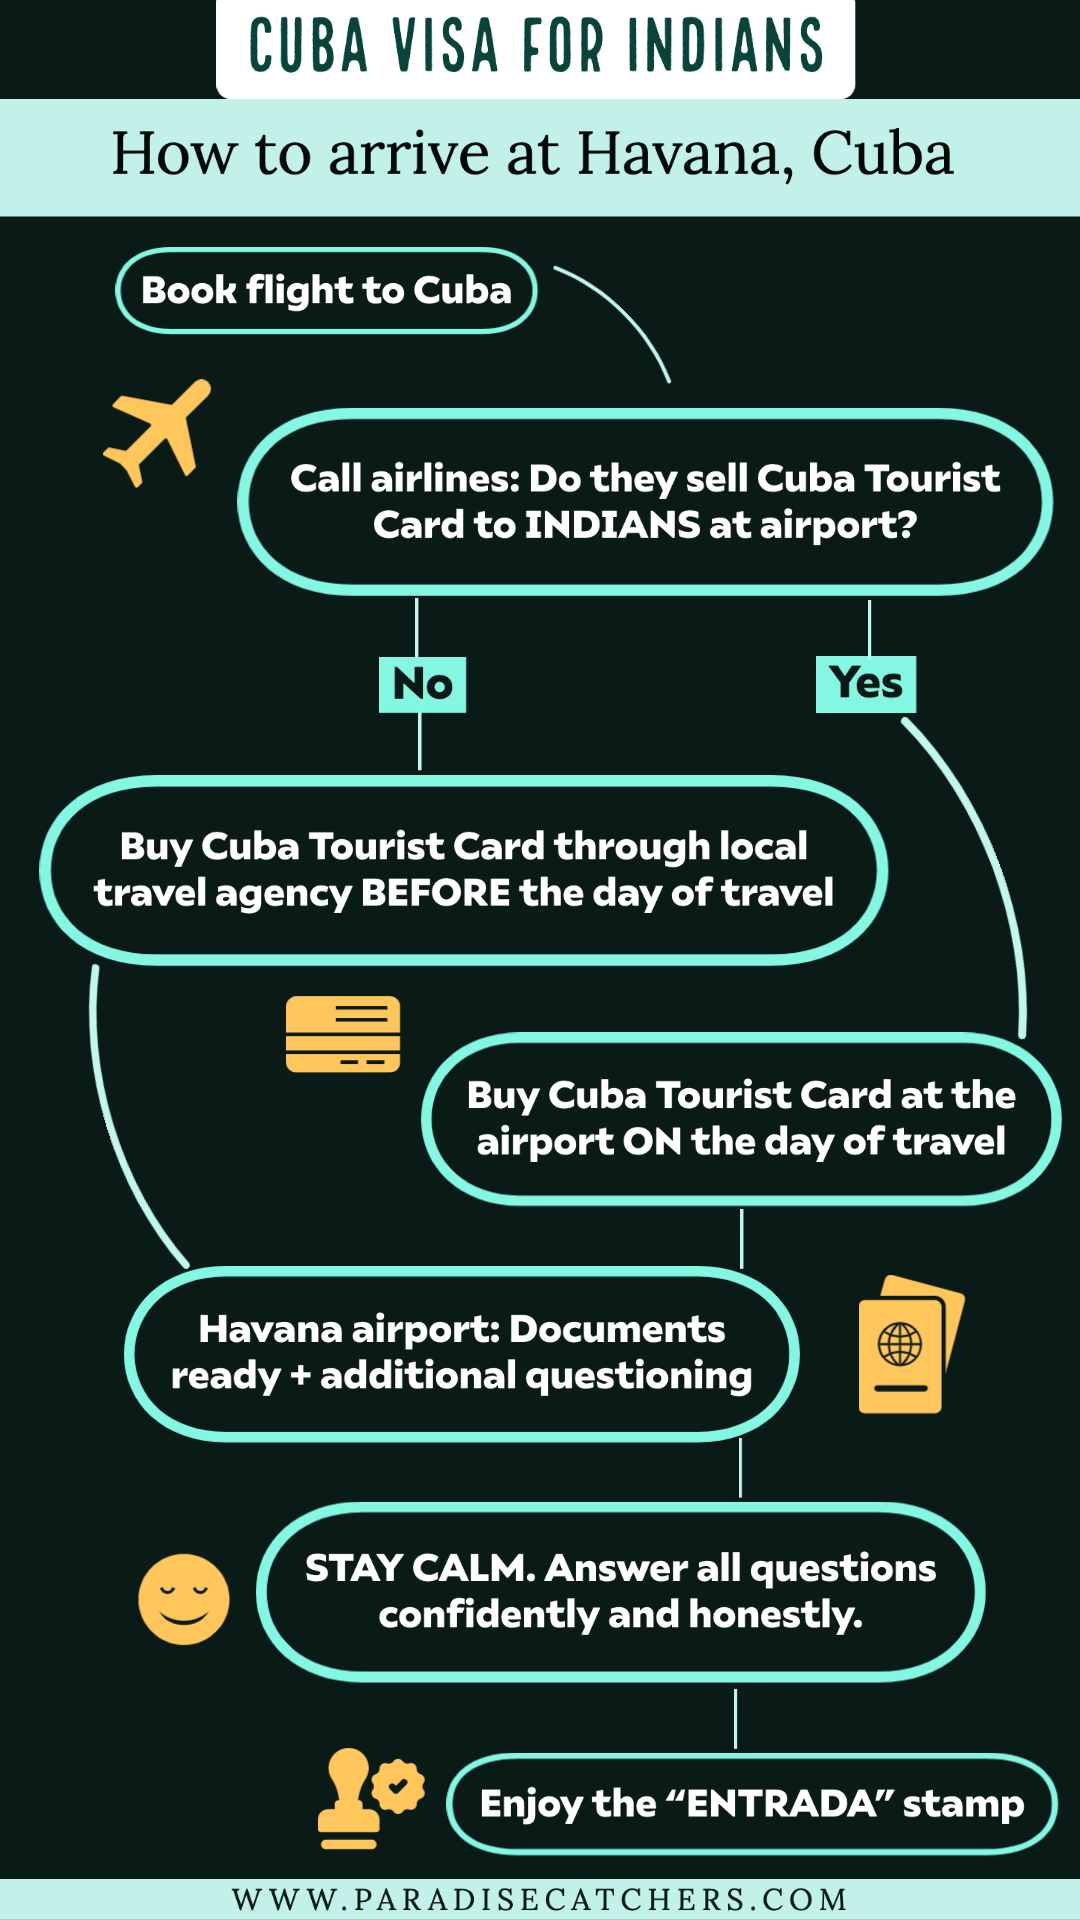 Cuba Tourist Card for Indians - Step by step process.